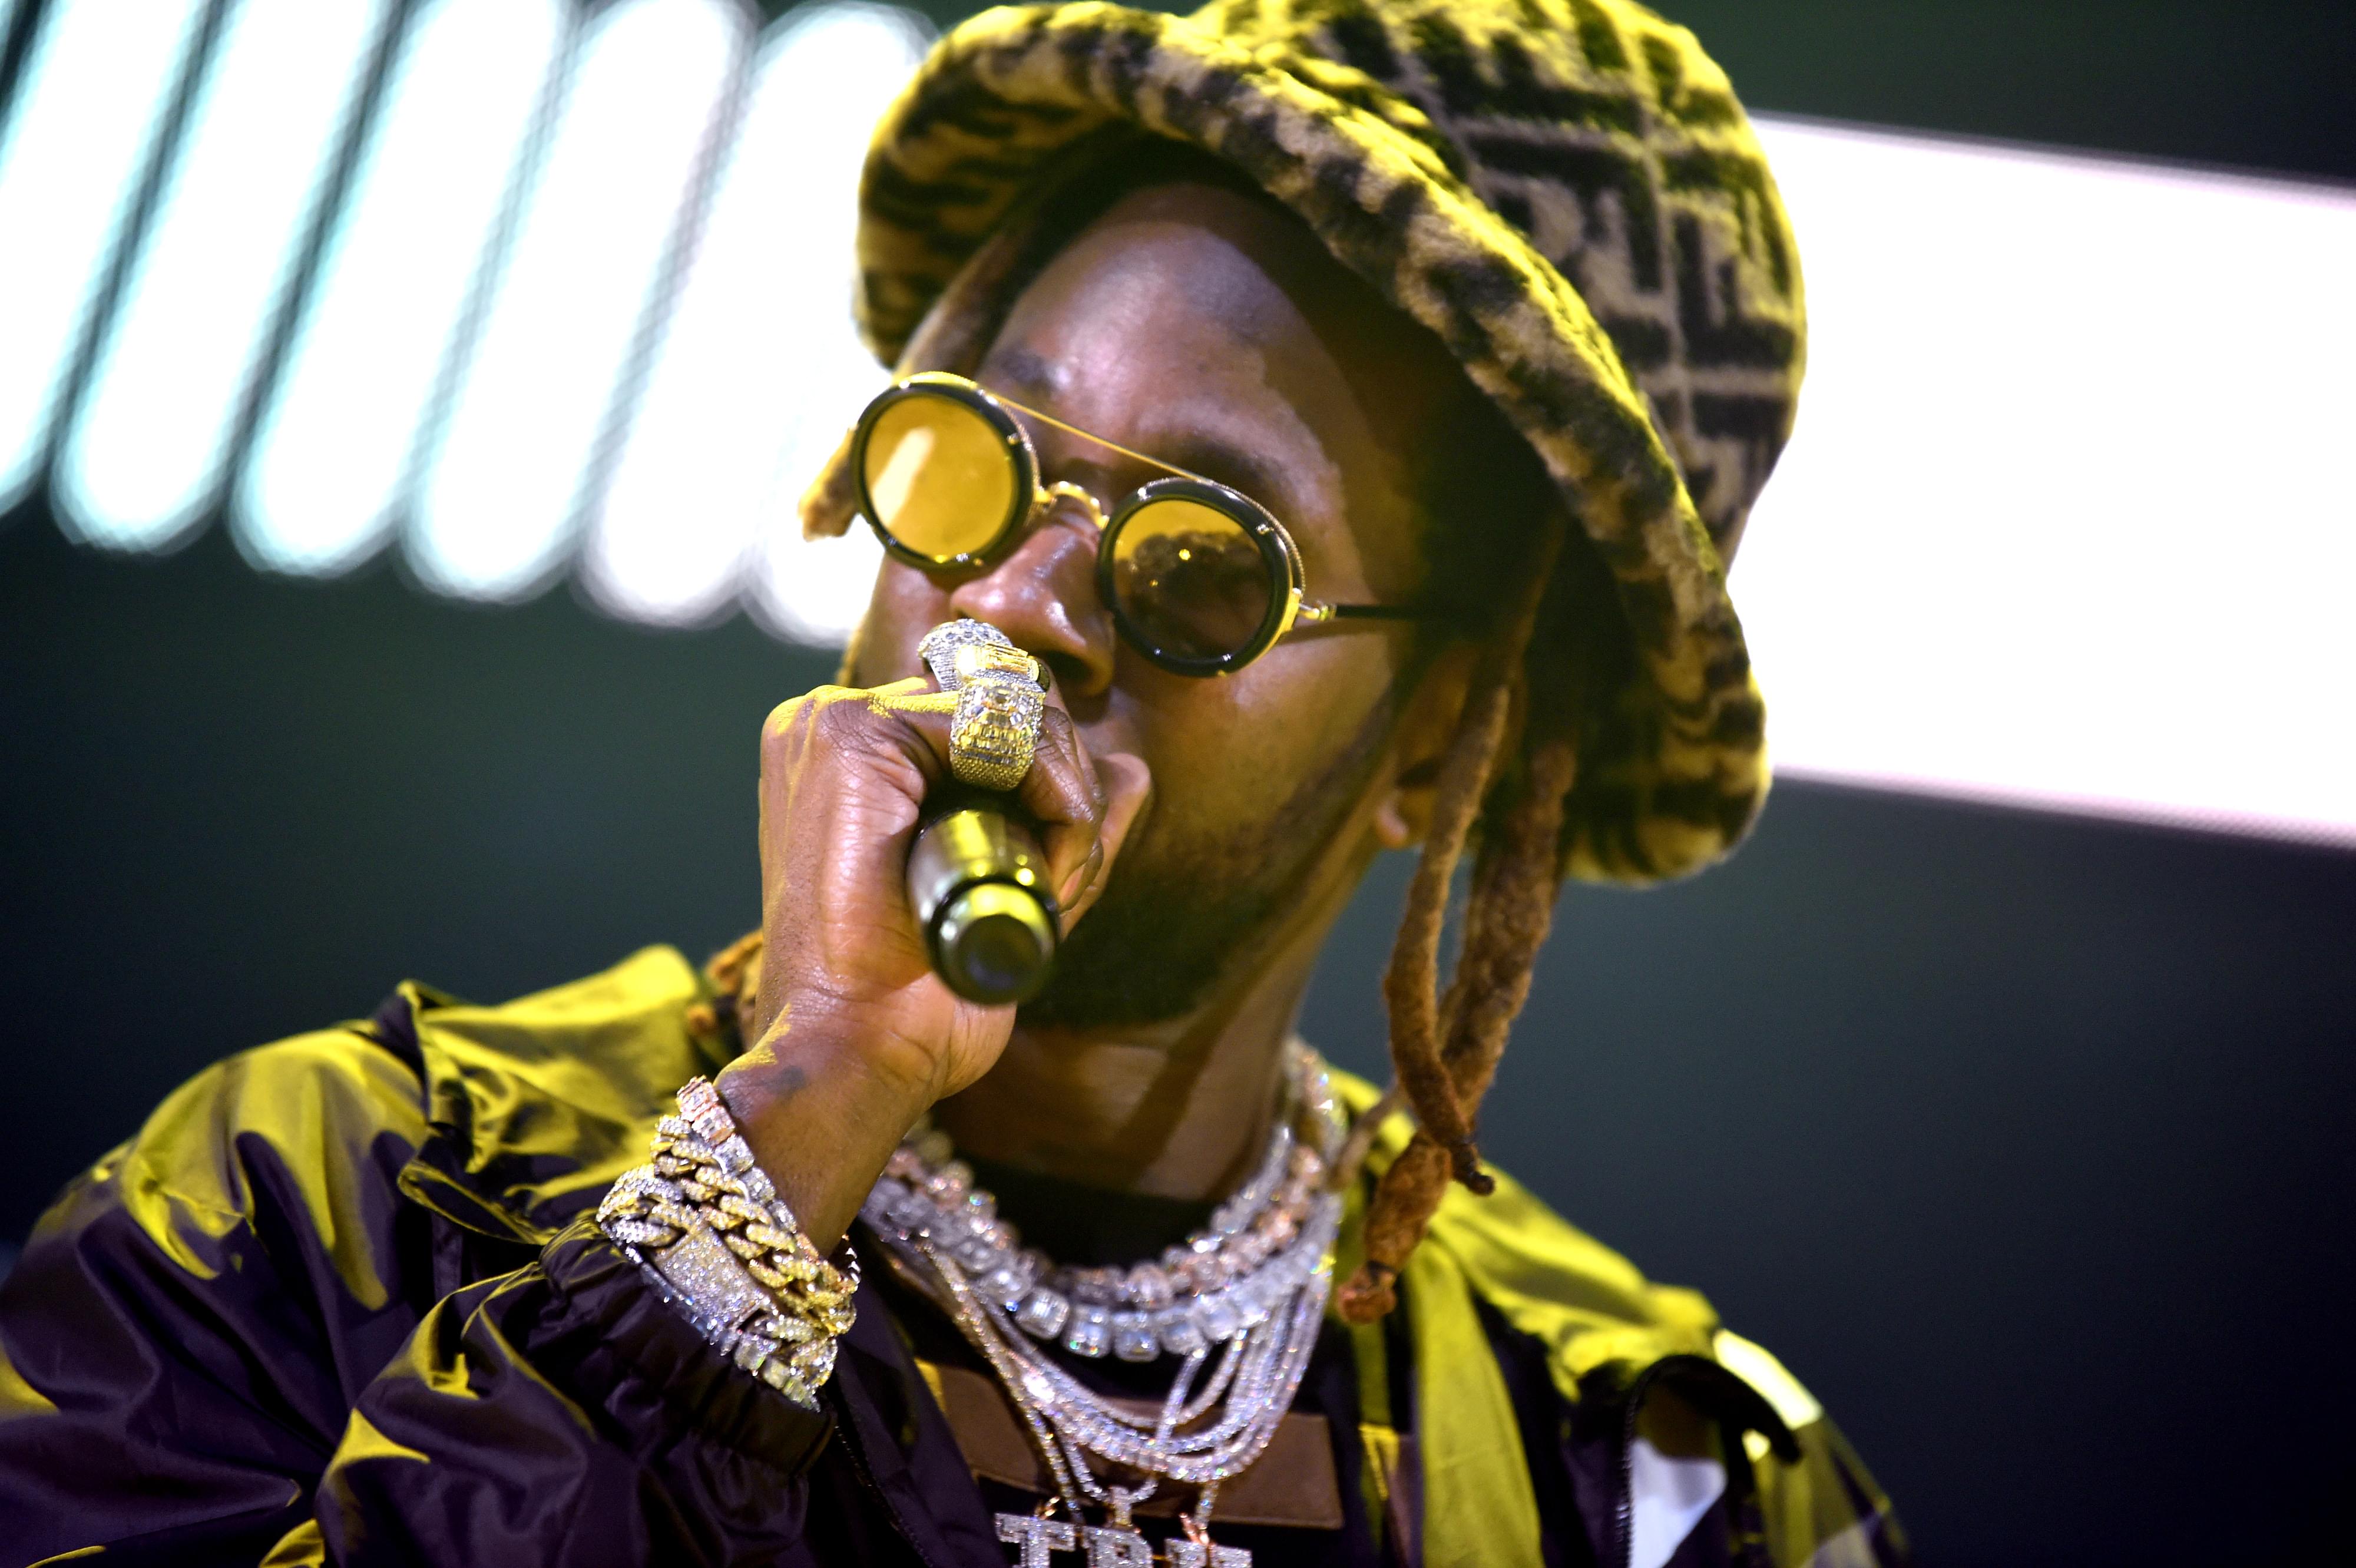 2 Chainz Opens New Restaurant “Members Only”